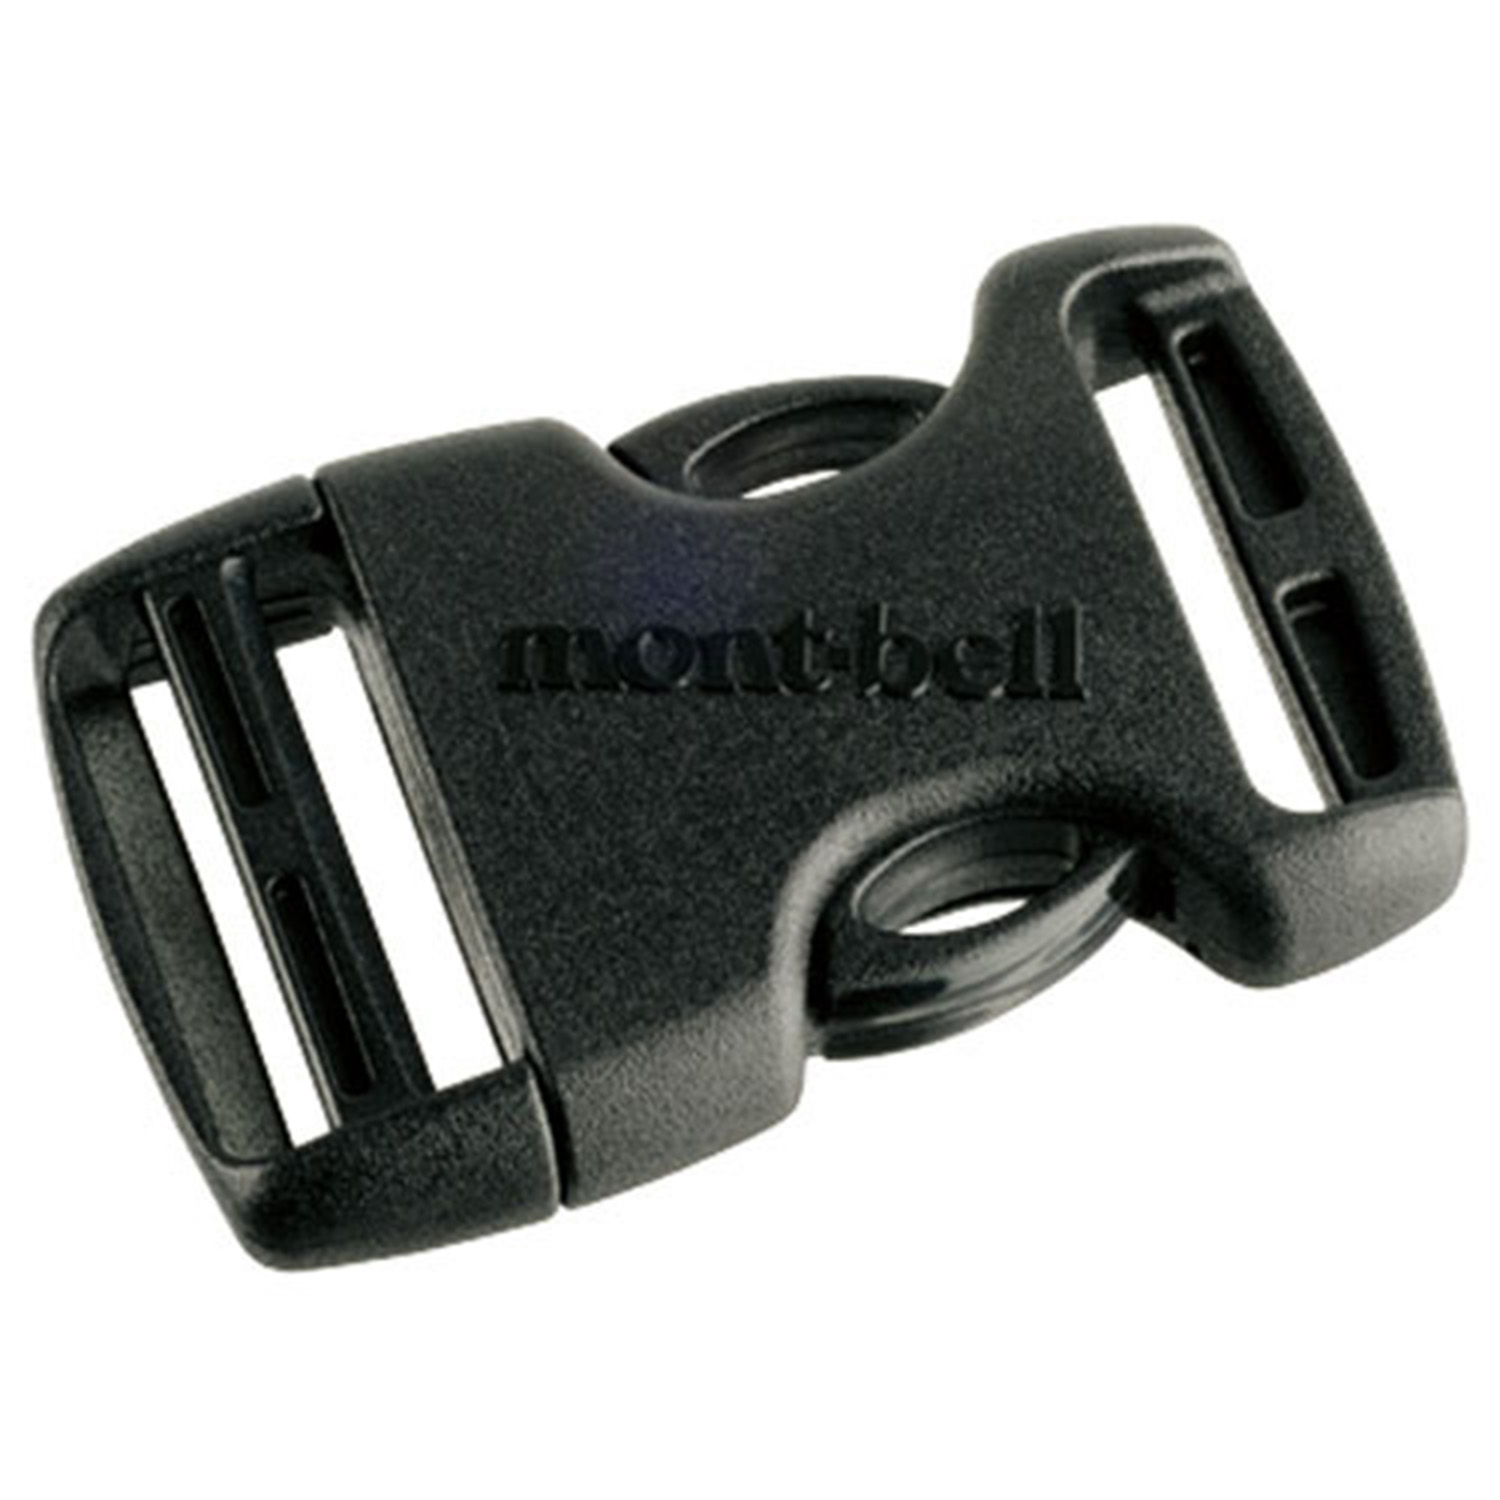 Side squeeze plastic buckles